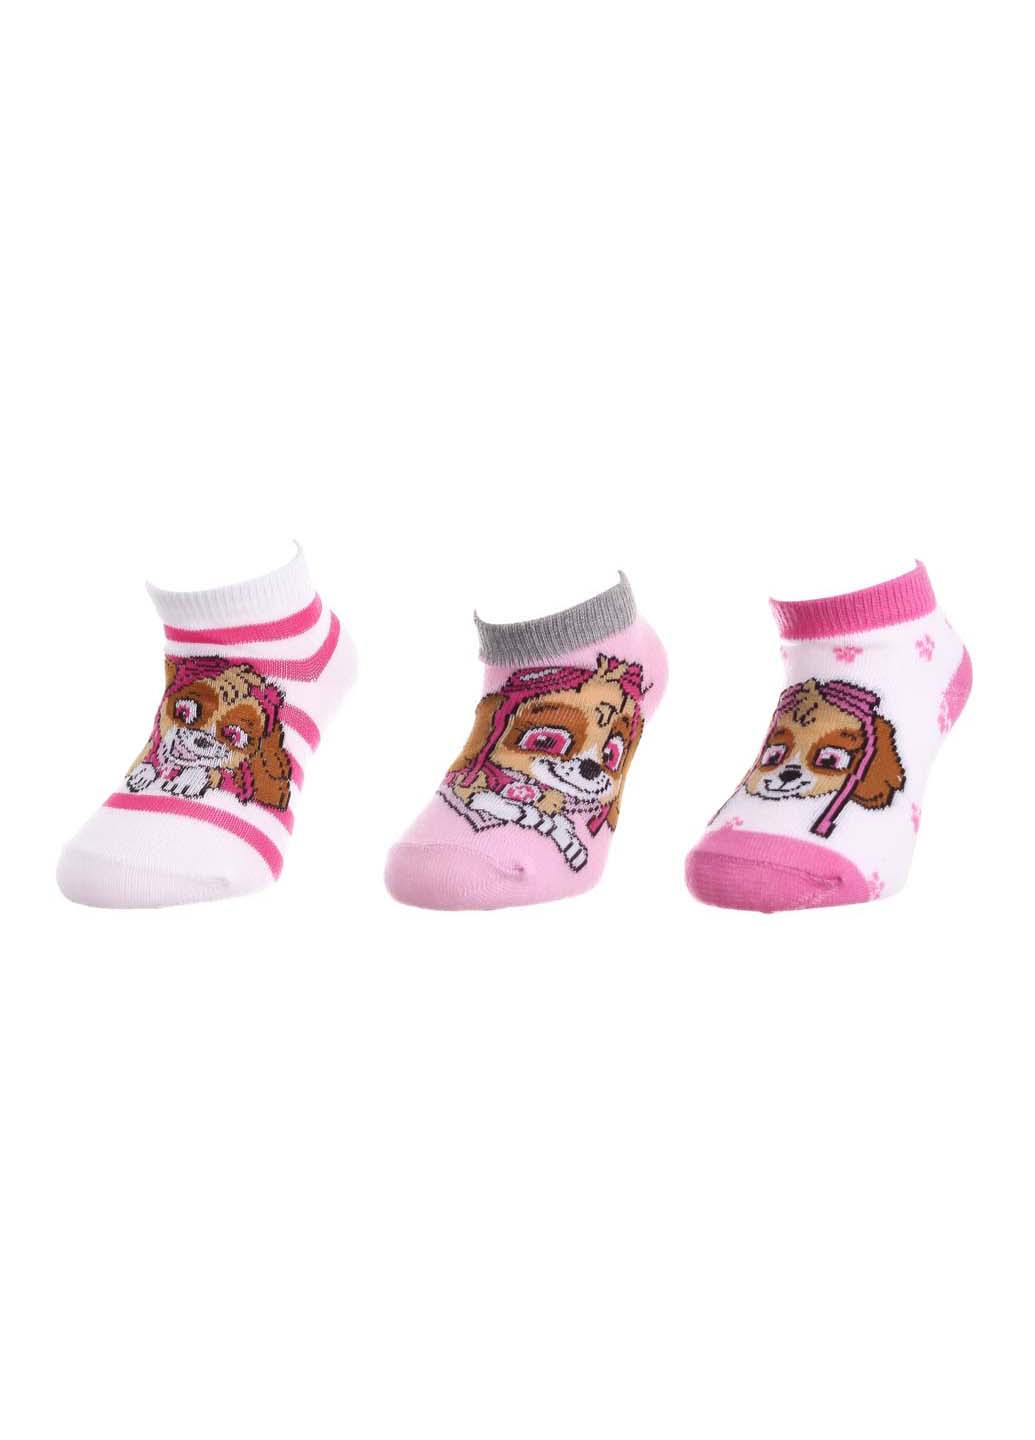 Носки Paw Patrol stella and pea/stella and happy/stella in total 3-pack (257727410)